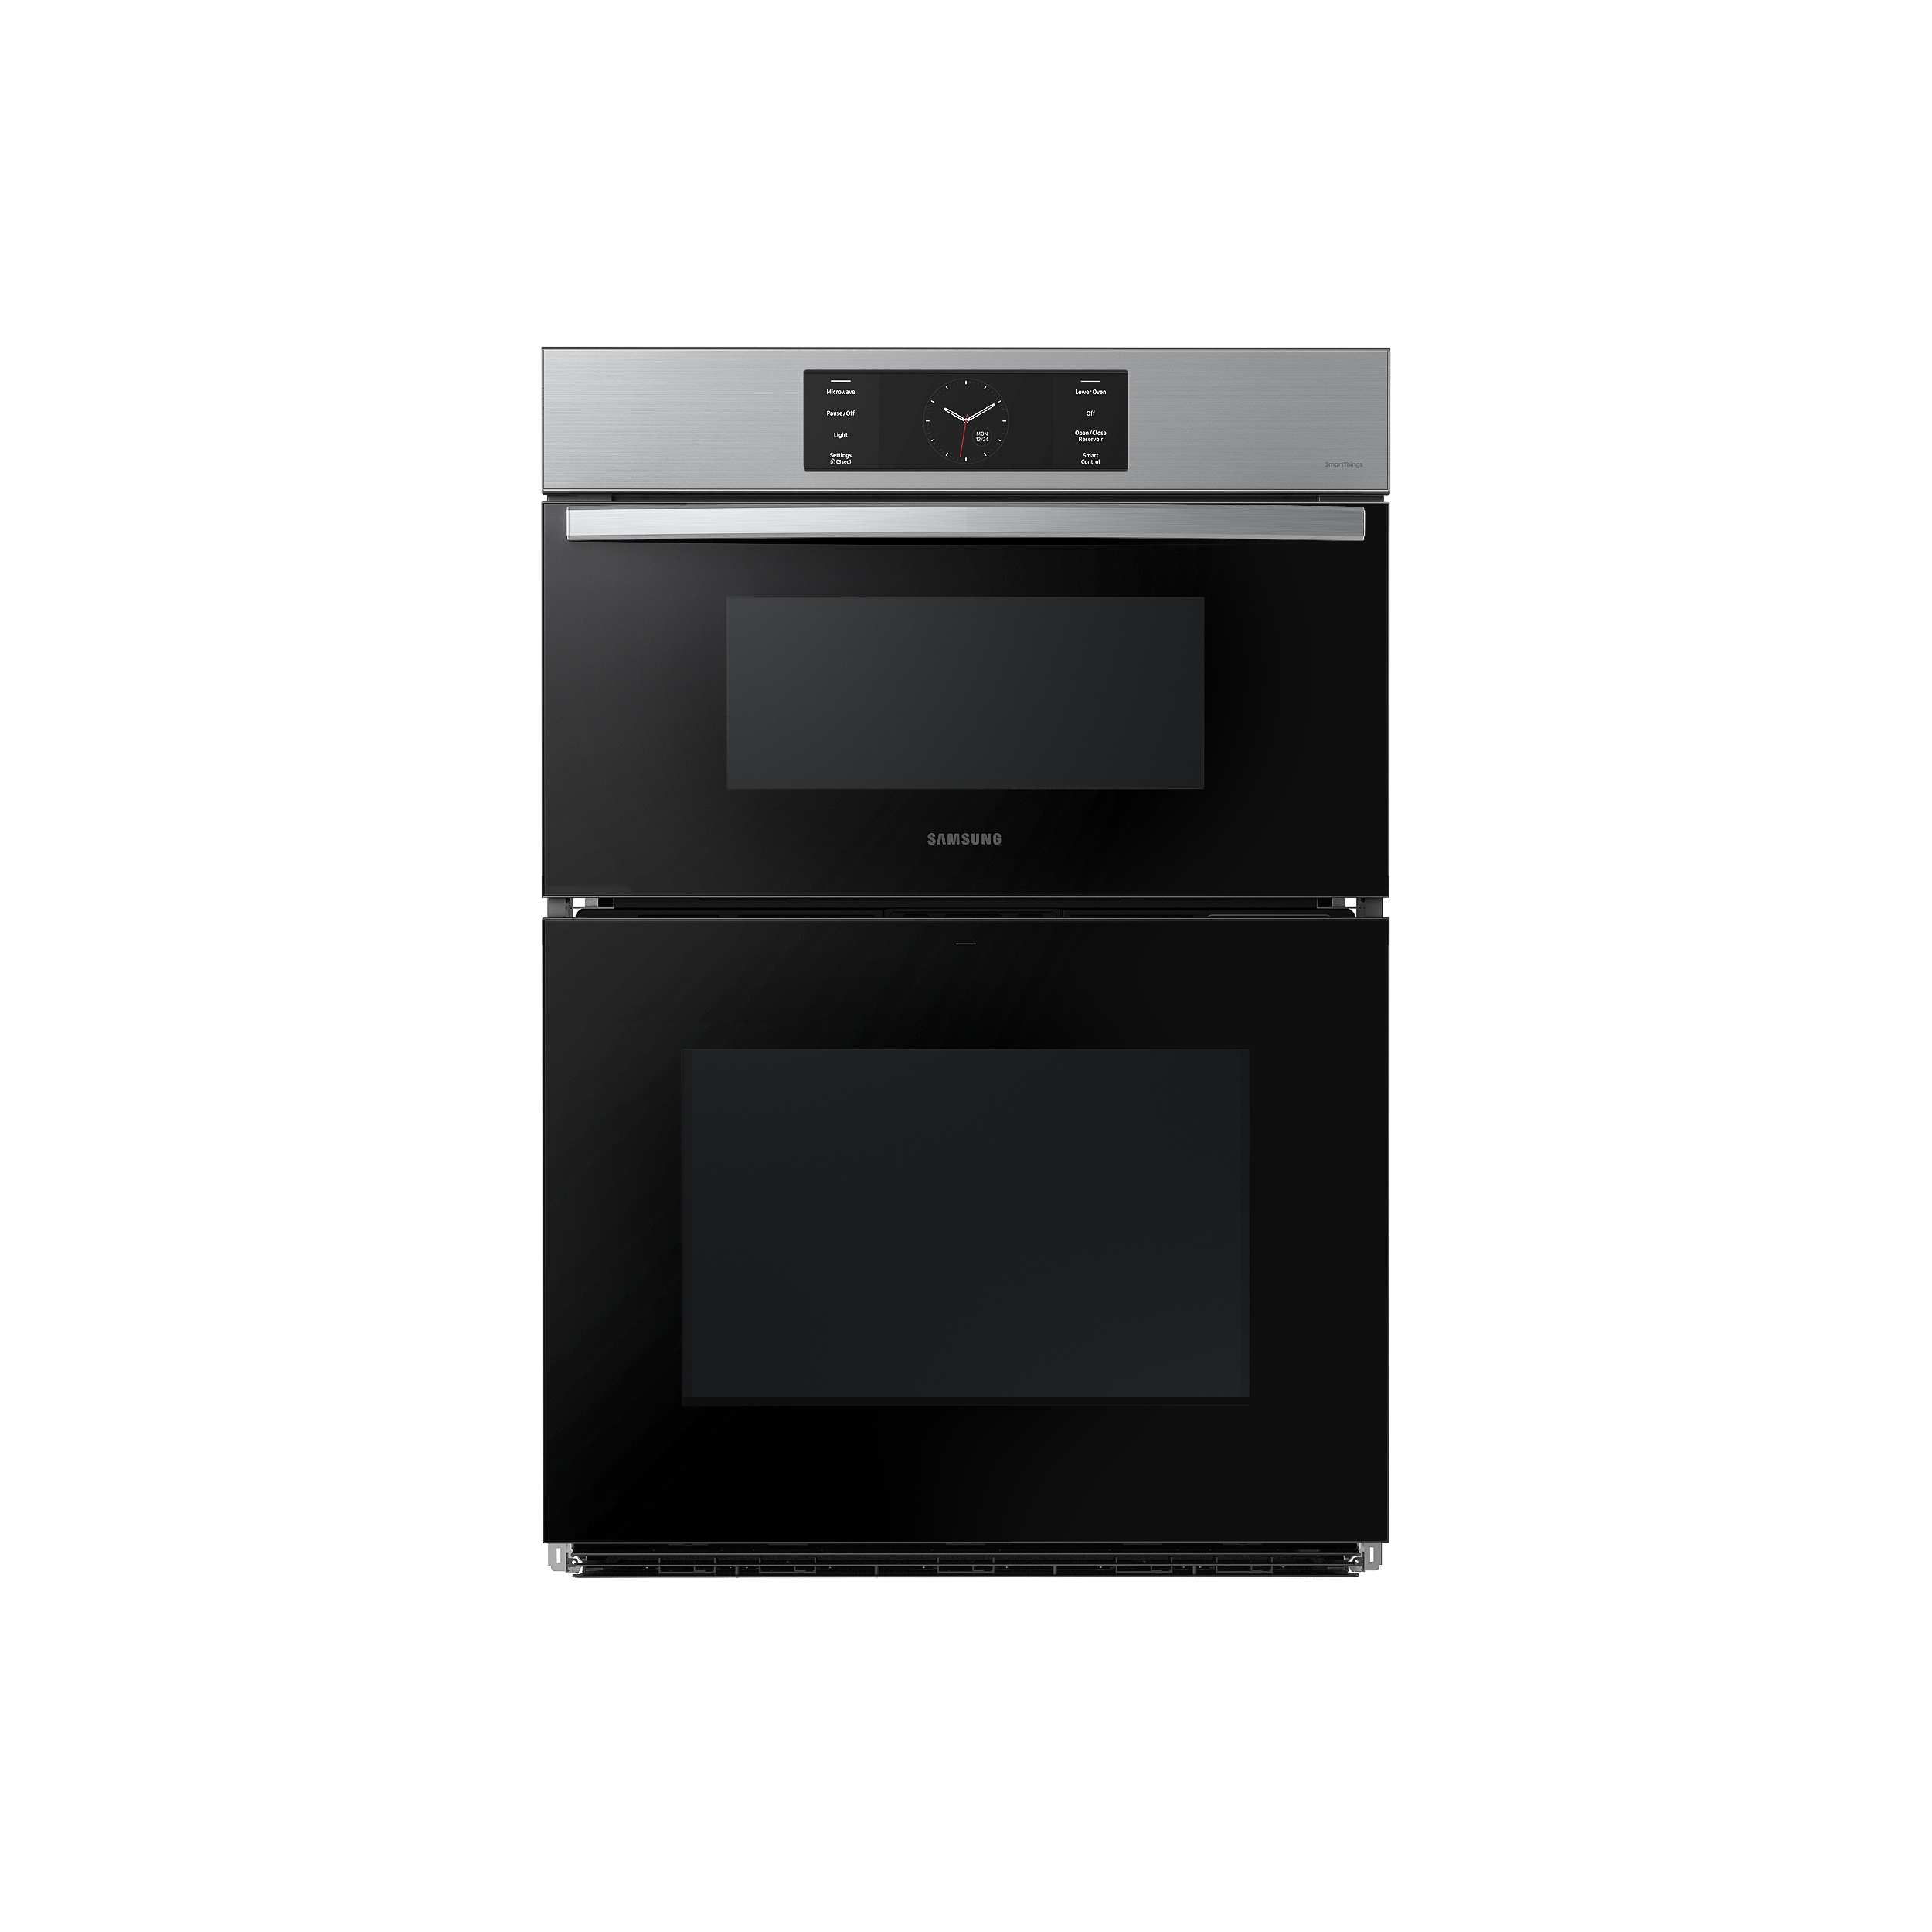 Samsung NQ70CG700DSR 30 Inch Combination Electric Wall Oven with 7.0 cu.  ft. Total Capacity, Air Fry, Dual Convection, Flex Duo, Steam Cook, Wi-Fi  Connectivity, Speed Cook, Self-Clean, Digital Touch Controls, and Sabbath